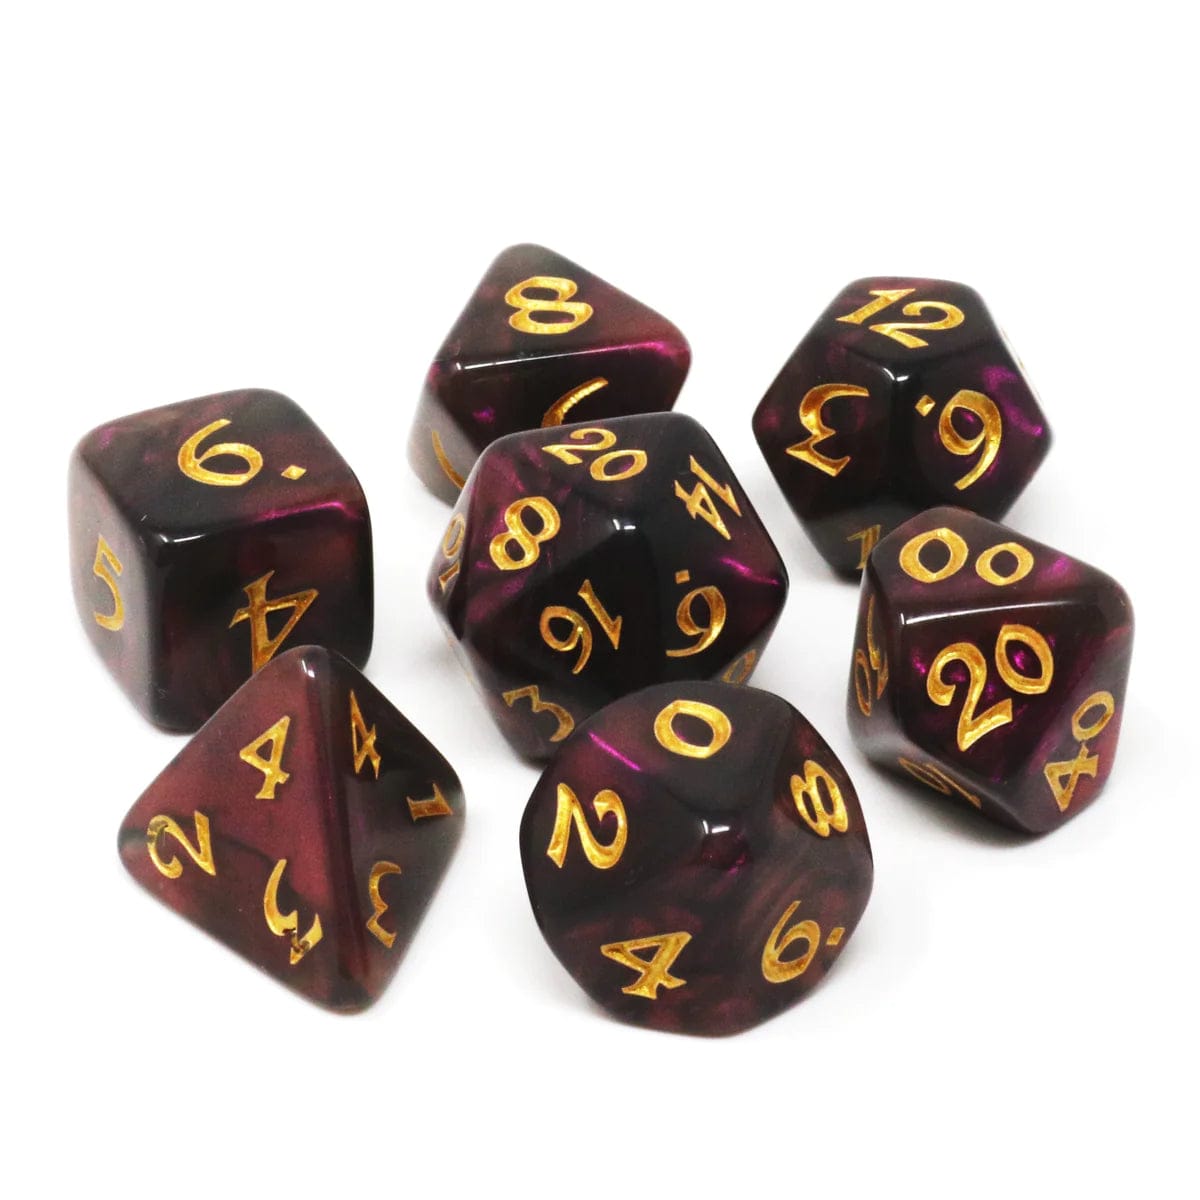 Die Hard Dice: 7pc RPG Set - Elessia Moonstone, Inkswell with Gold